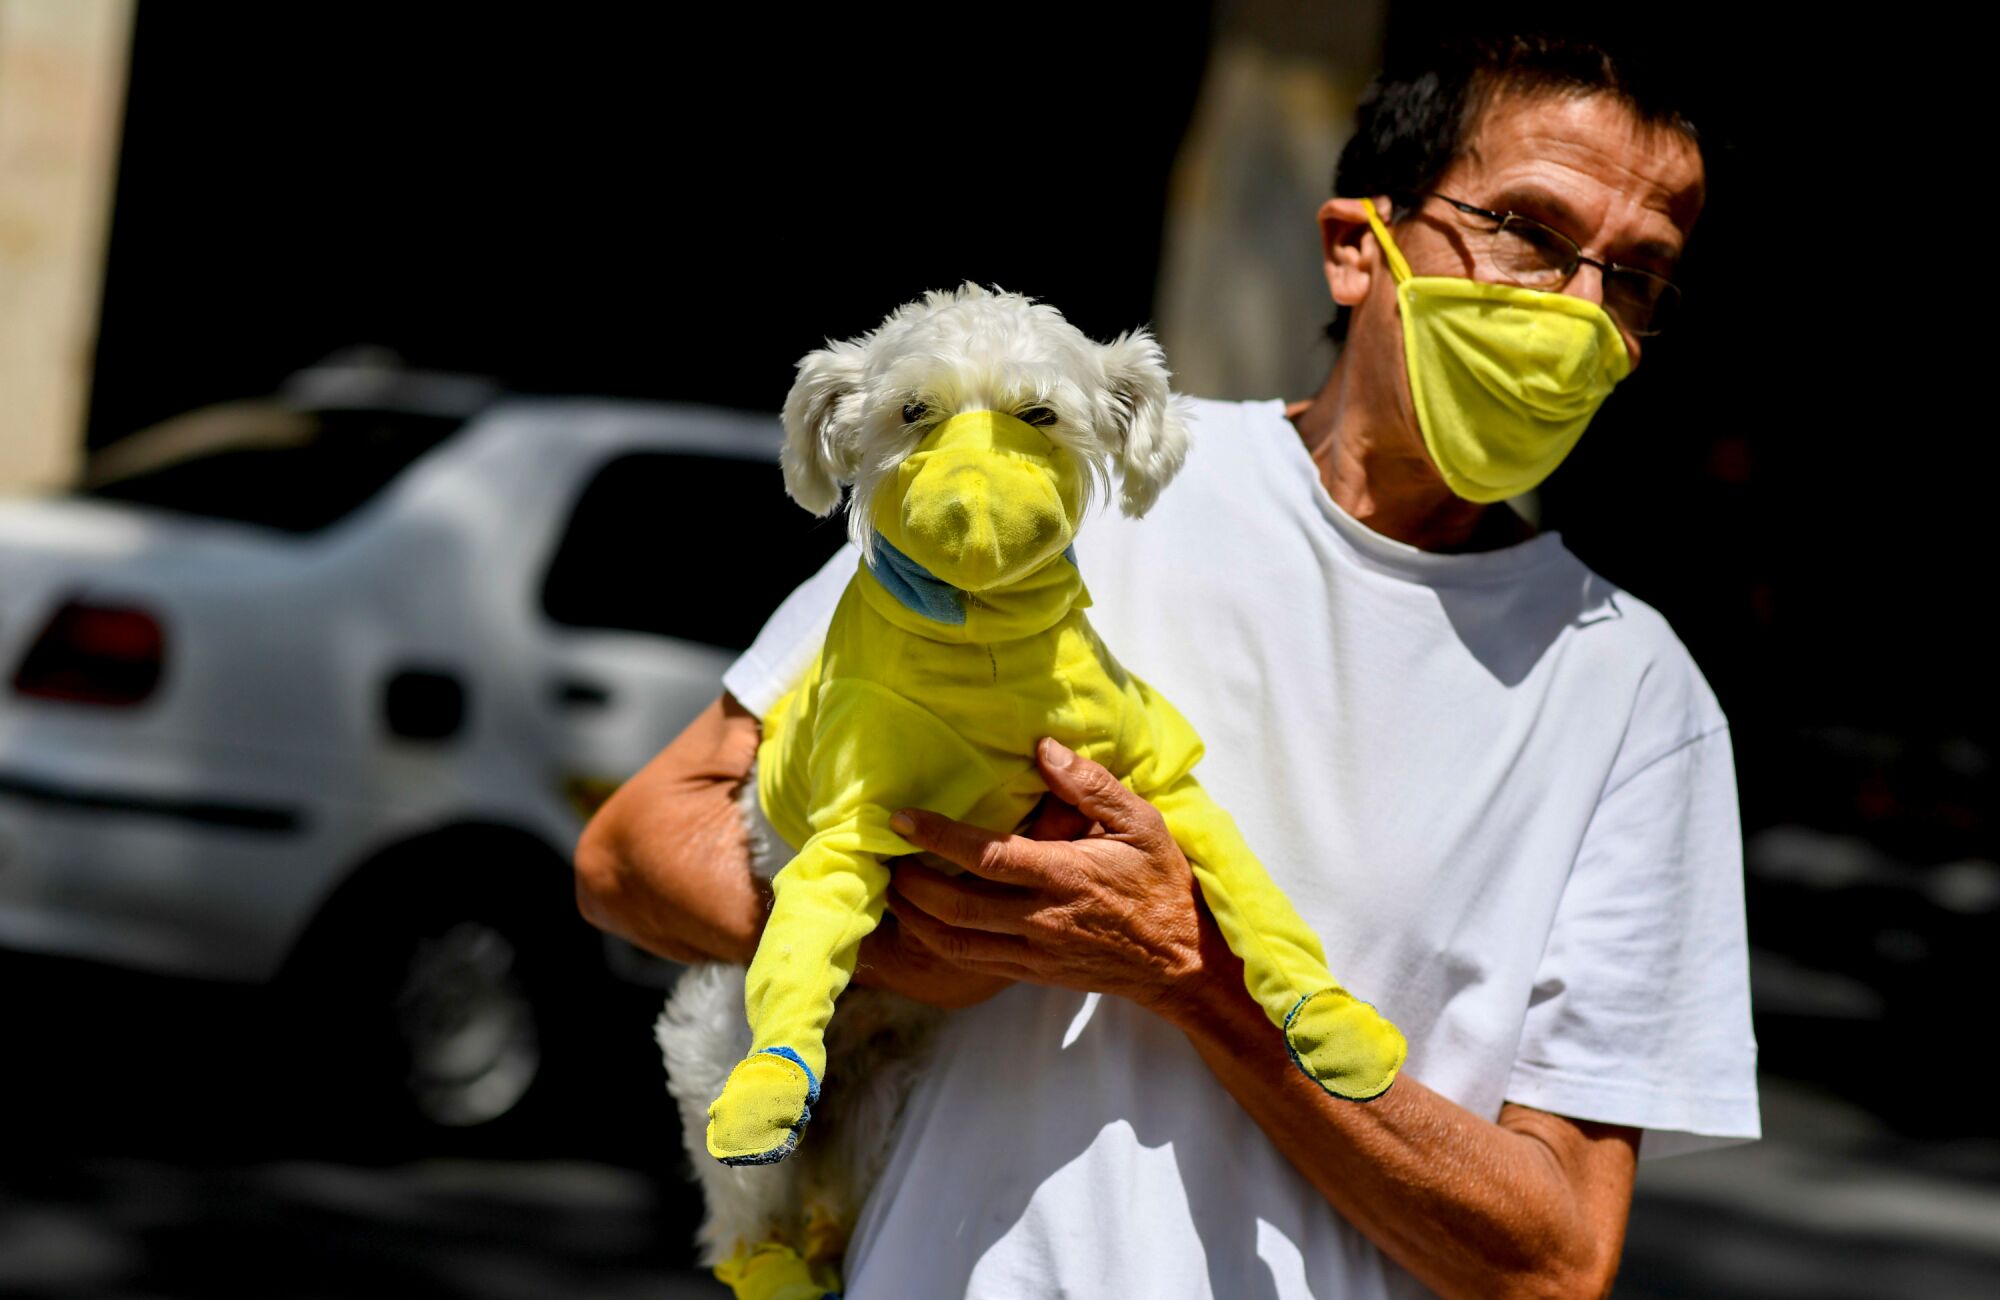 VENEZUELA: A man wears a face mask March 20 while he carries his dog with a protective suit as a preventive measure against the coronavirus spread in Caracas, Venezuela.